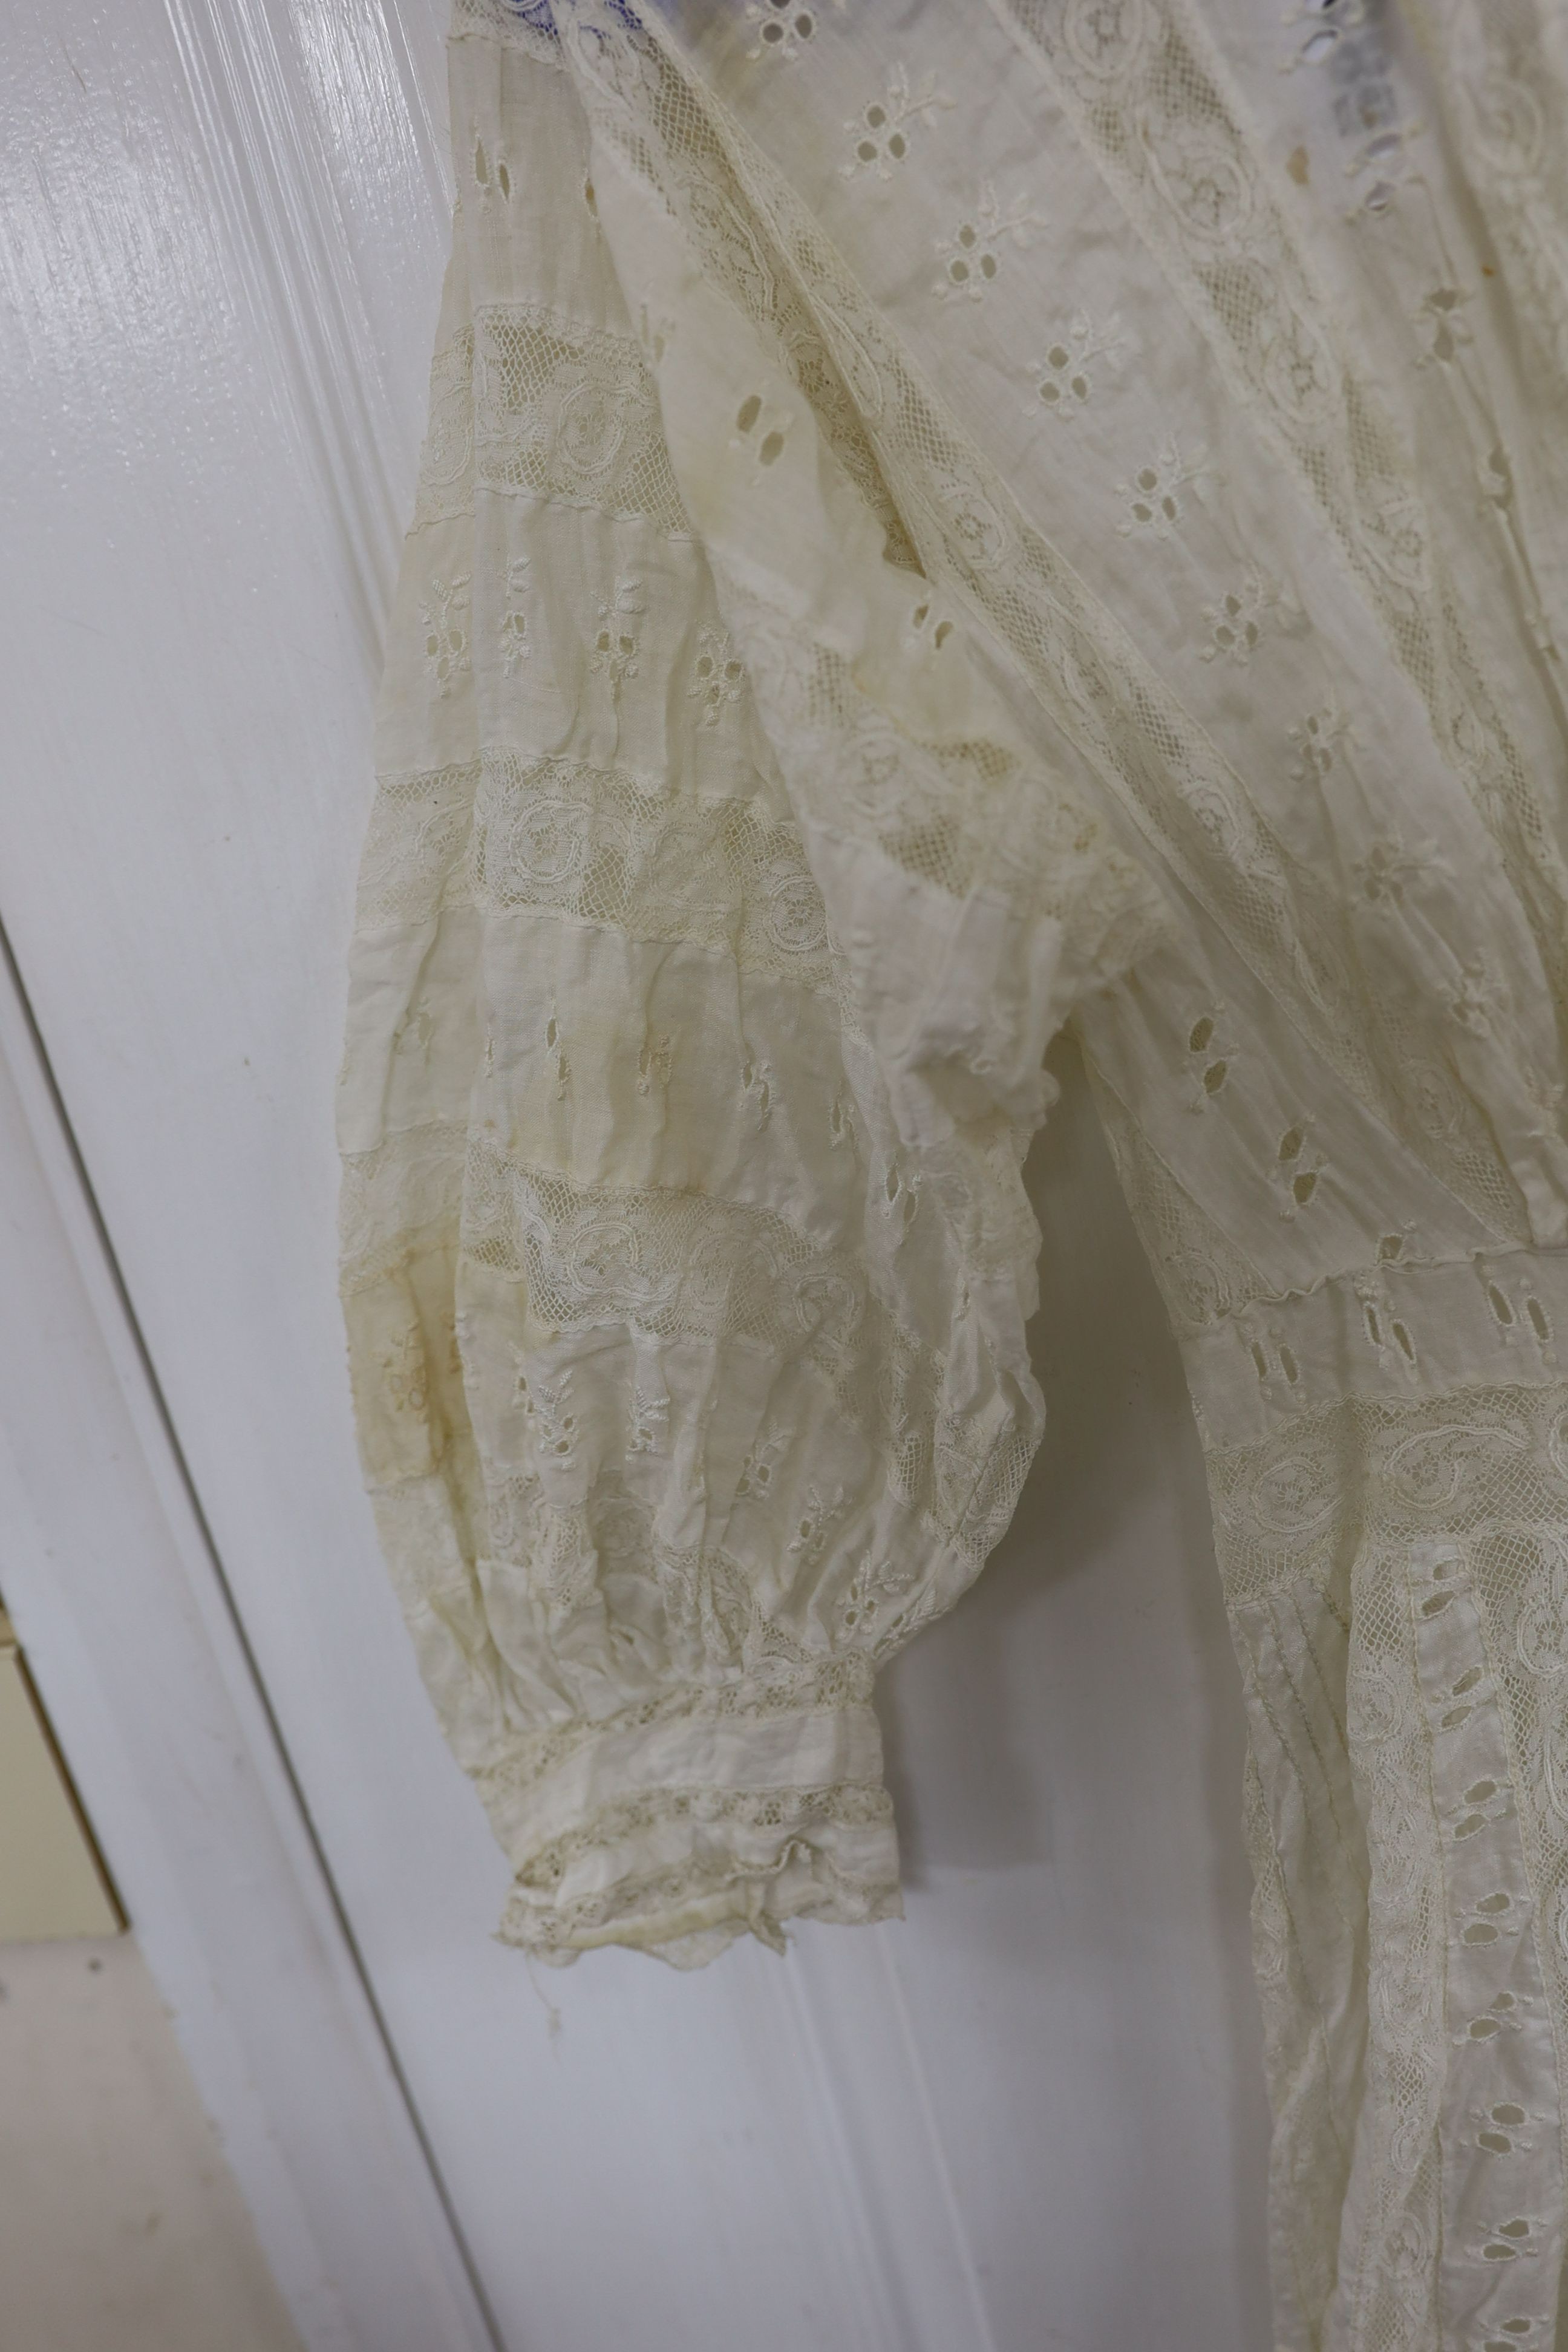 An Edwardian white worked and lace inserted ladies croquet garden dress